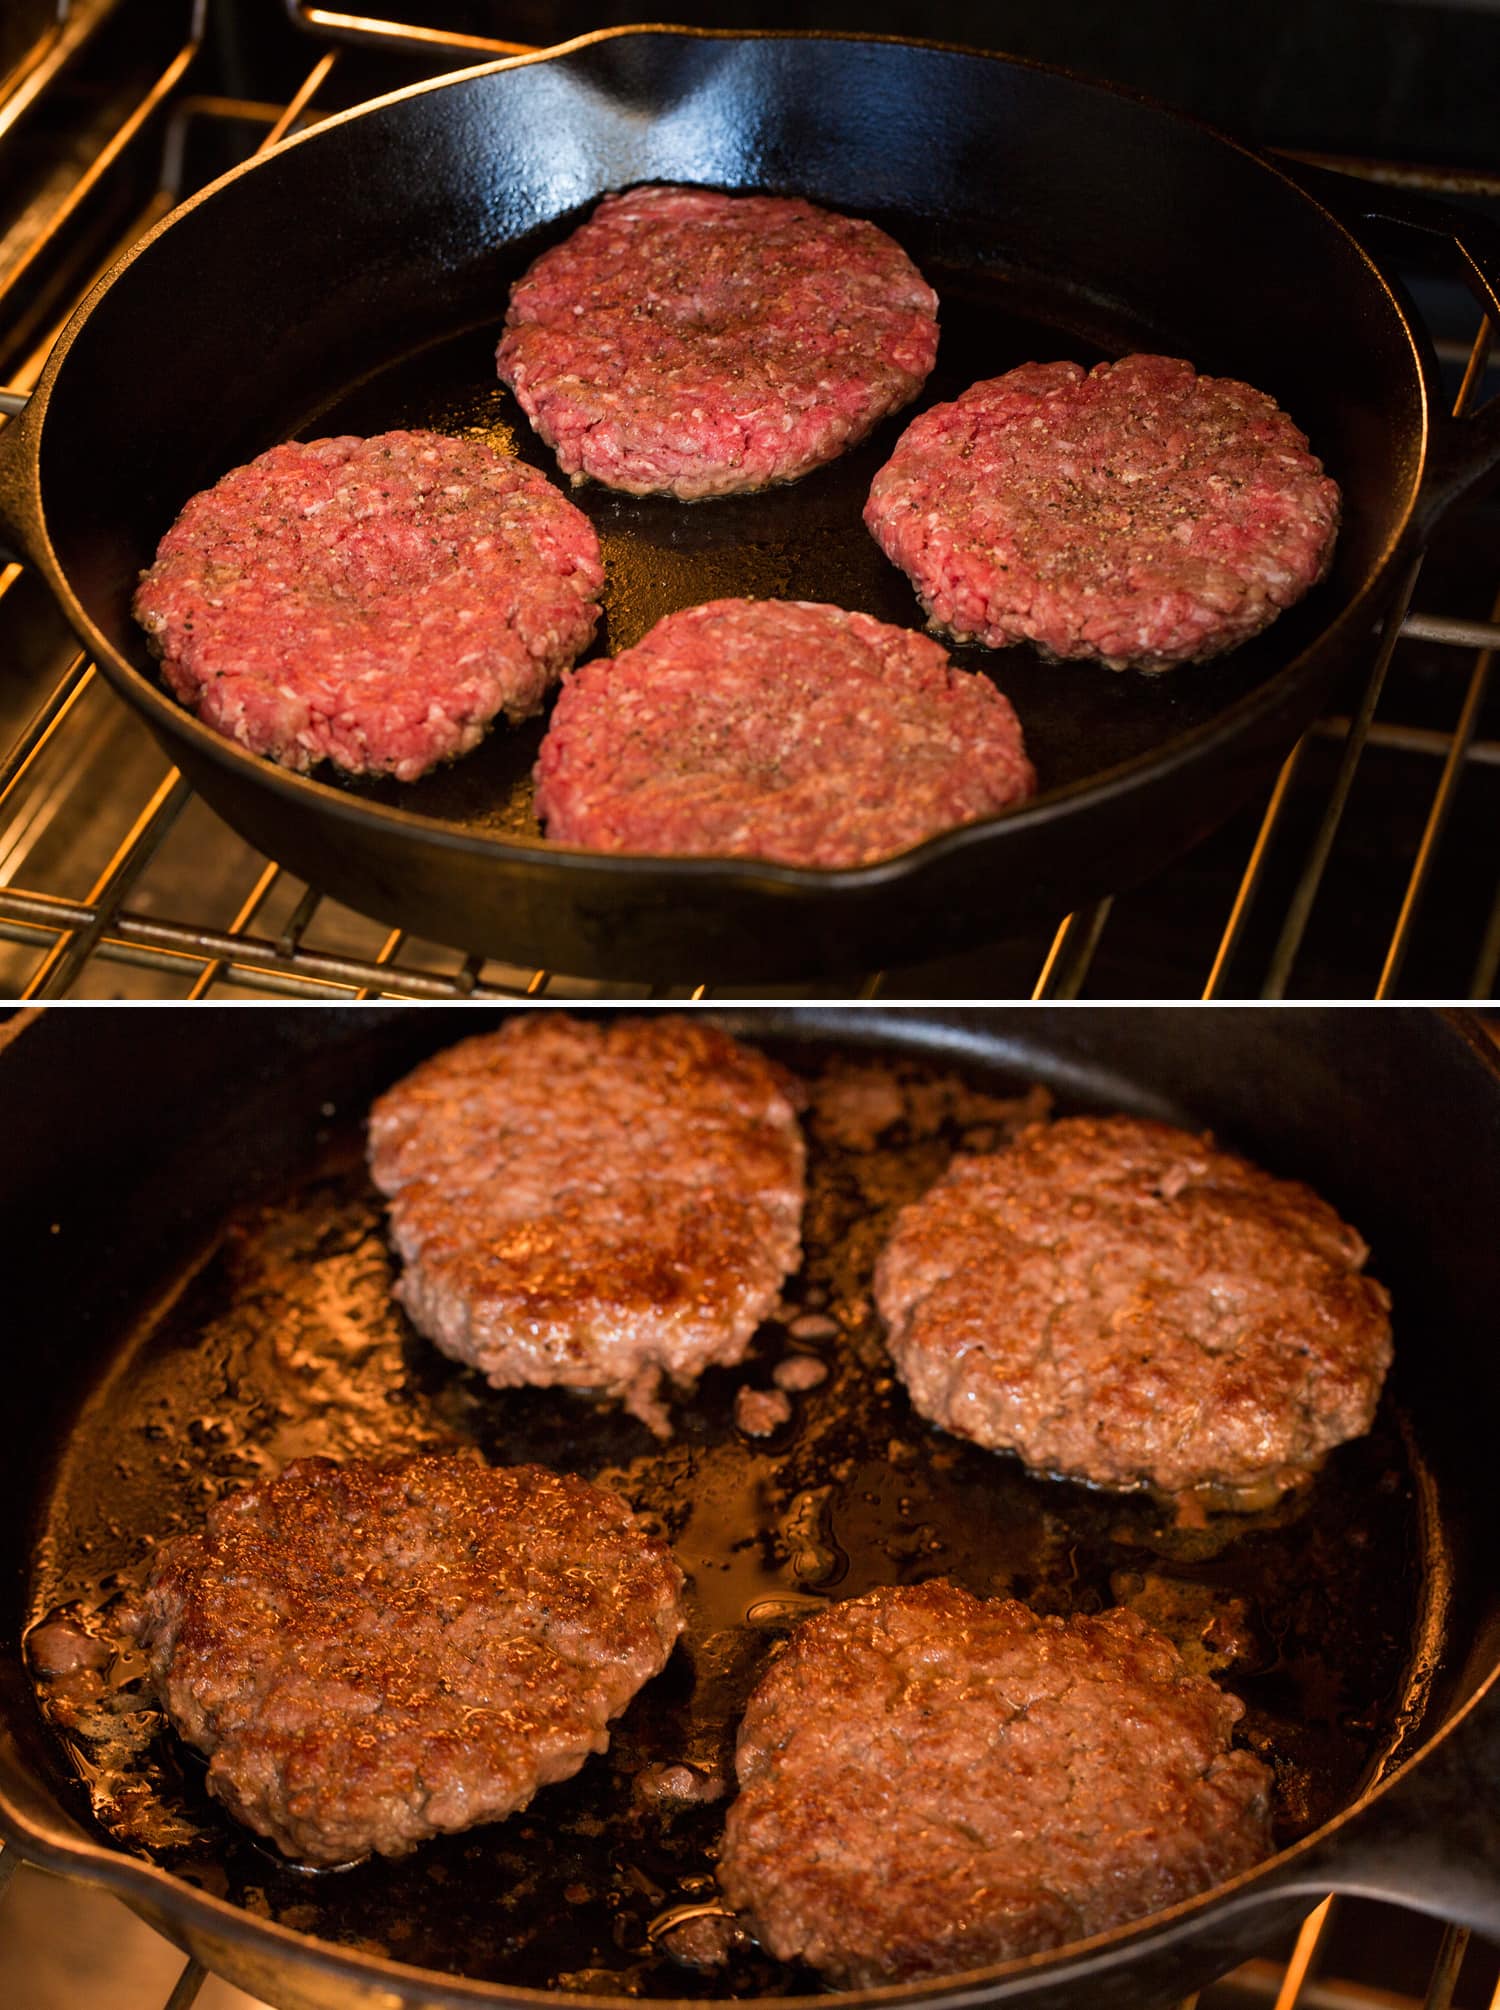 Cooking burgers in the oven.